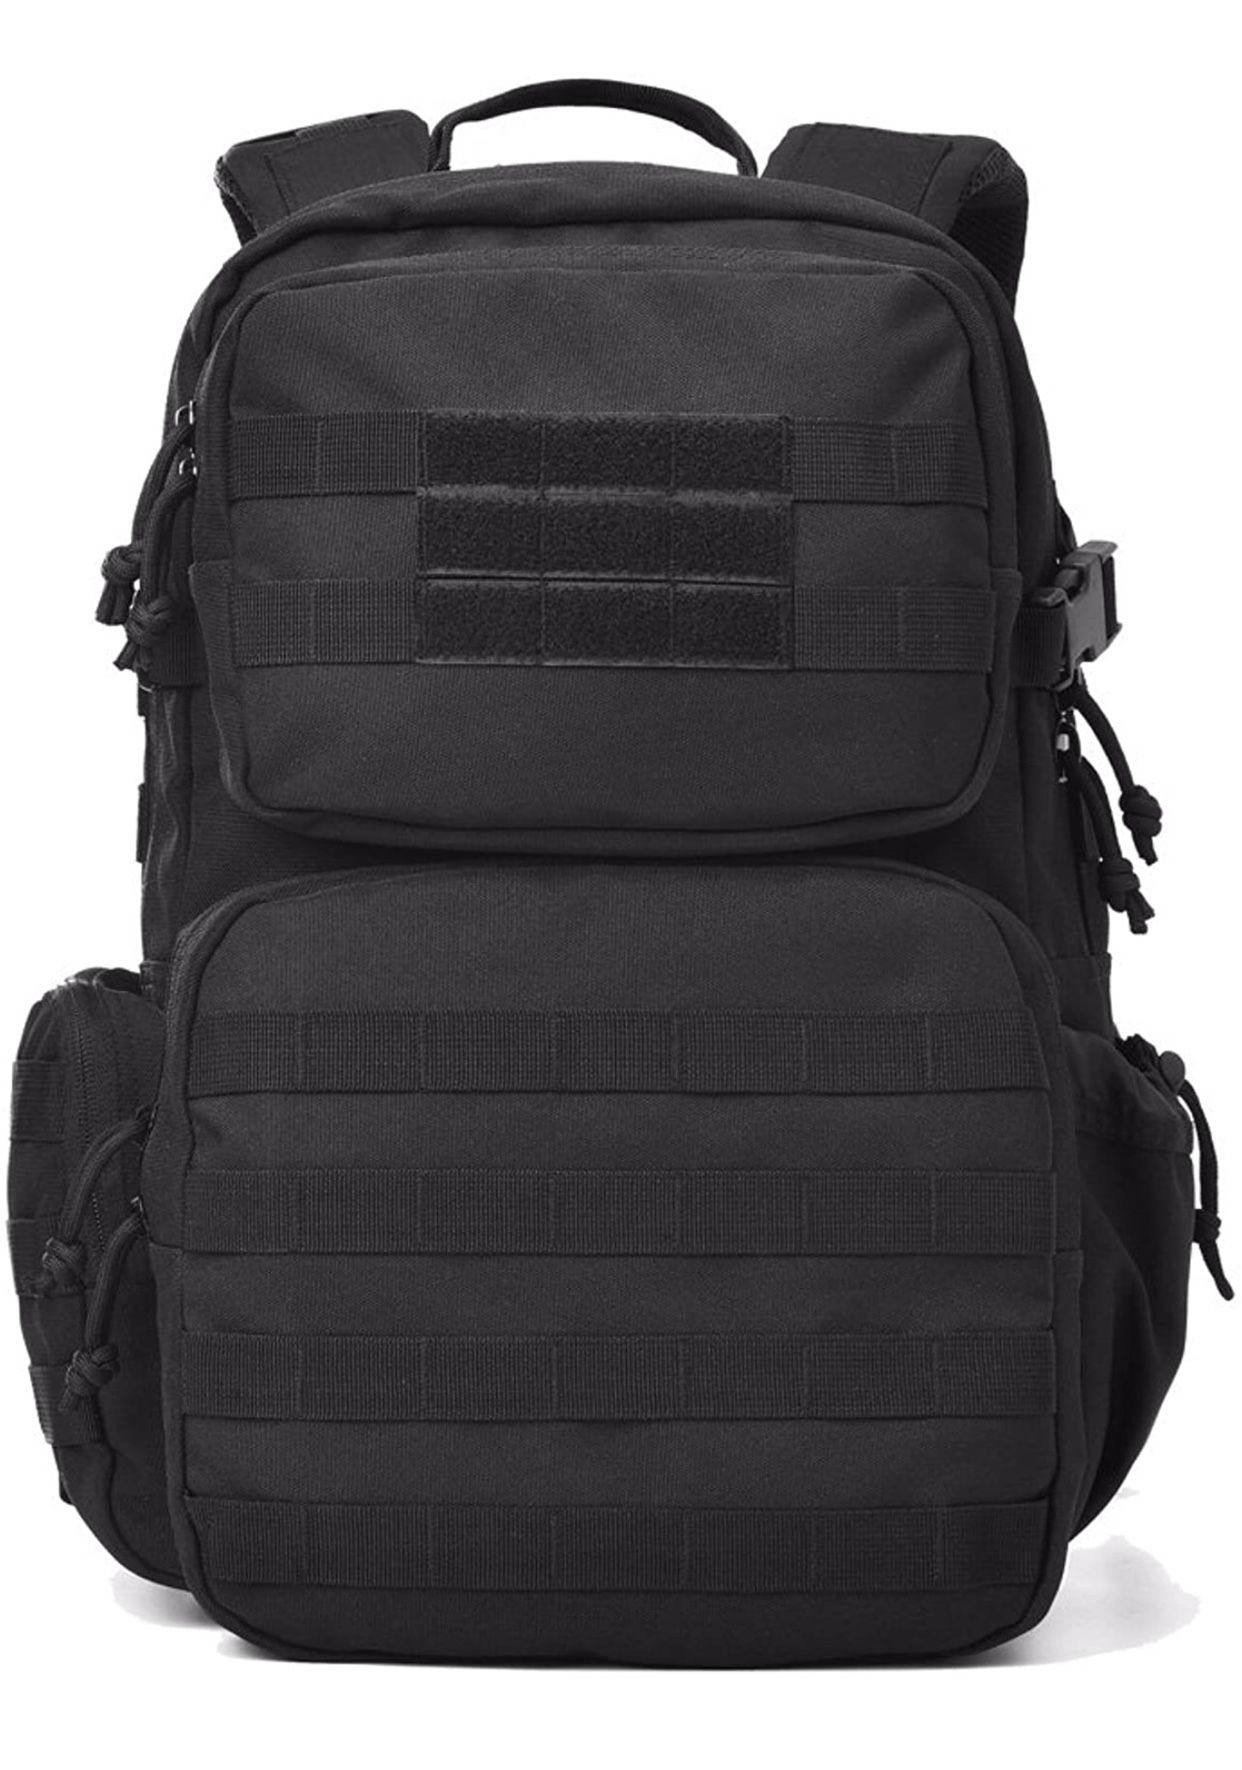 Brand new and come with flag patch  Military Tactical Backpack Army Assault Pack Molle Bug Bag Backpacks Rucksack for Outdoor Sport Travel Hiking Camp